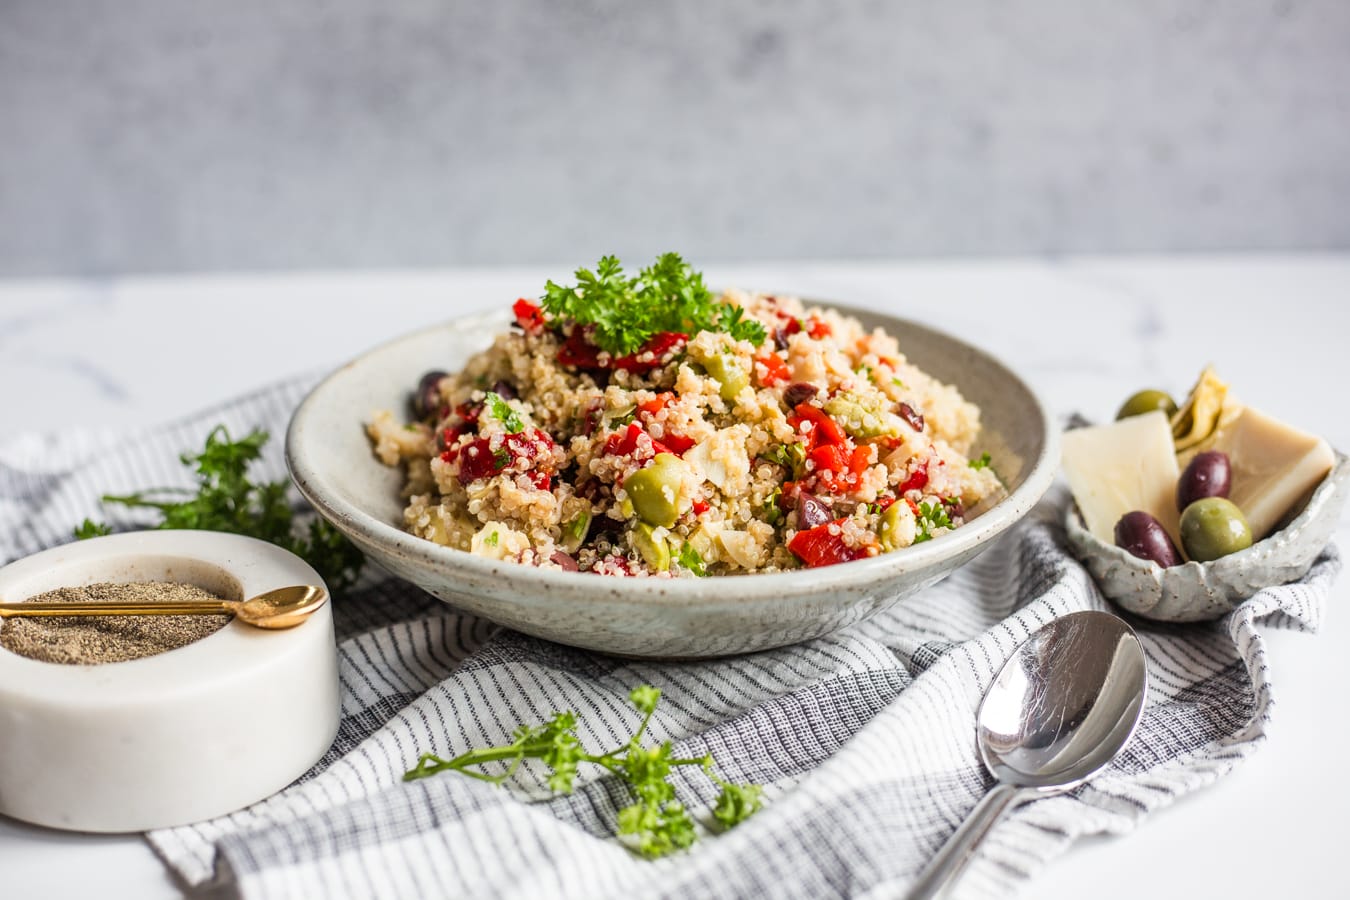 A bowl of quinoa mixed with roasted red peppers, parsley, olives, artichoke hearts, and hearts of palm